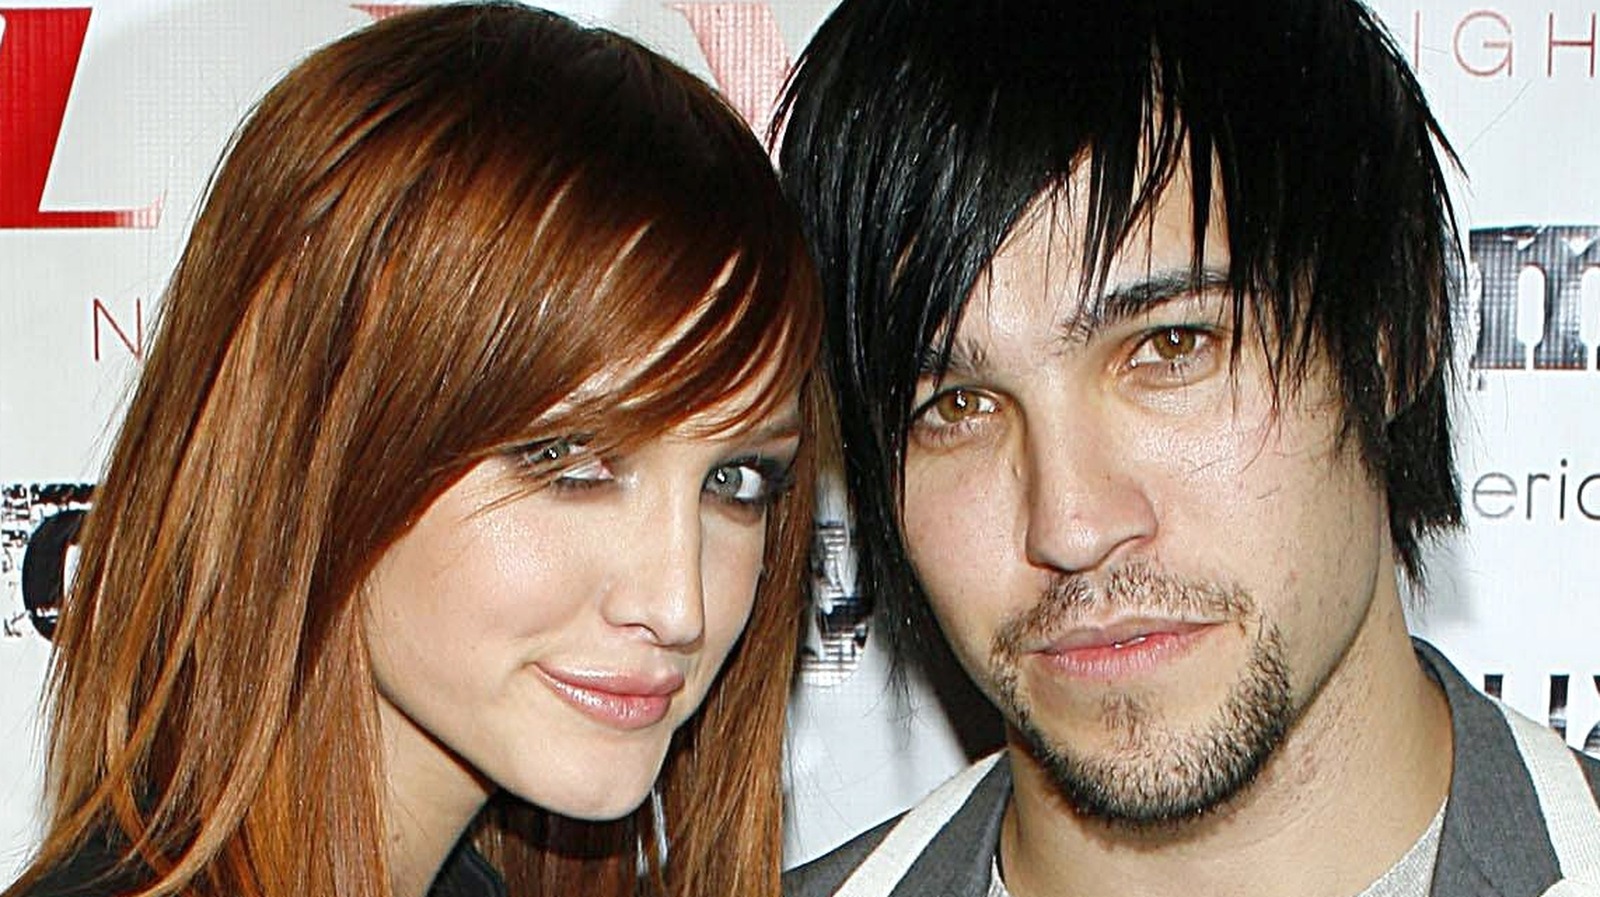 Ashlee Simpson And Pete Wentz’s Son Looks Just Like His Famous Parents